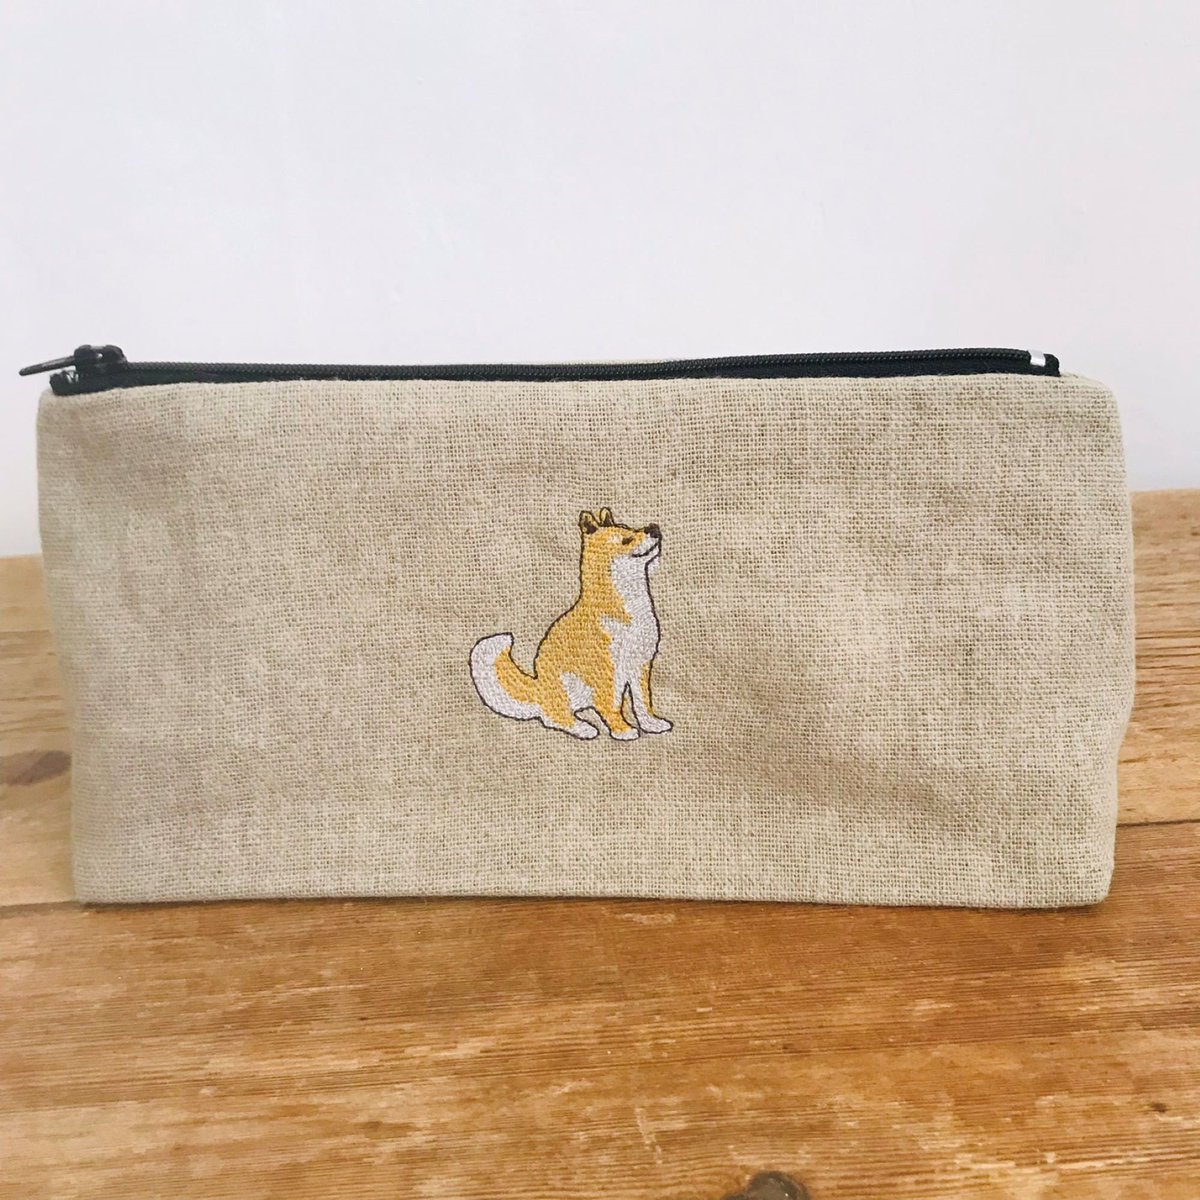 Excited to share the latest addition to my #etsy shop: Pencil Pouch Shiba Inu Linen etsy.me/3F5WI7K #beige #madeinfrance #zipperedpouch #smallpouch #travelcosmeticbag #doglovergifts #makeuppouch #shibainu #reusablebag